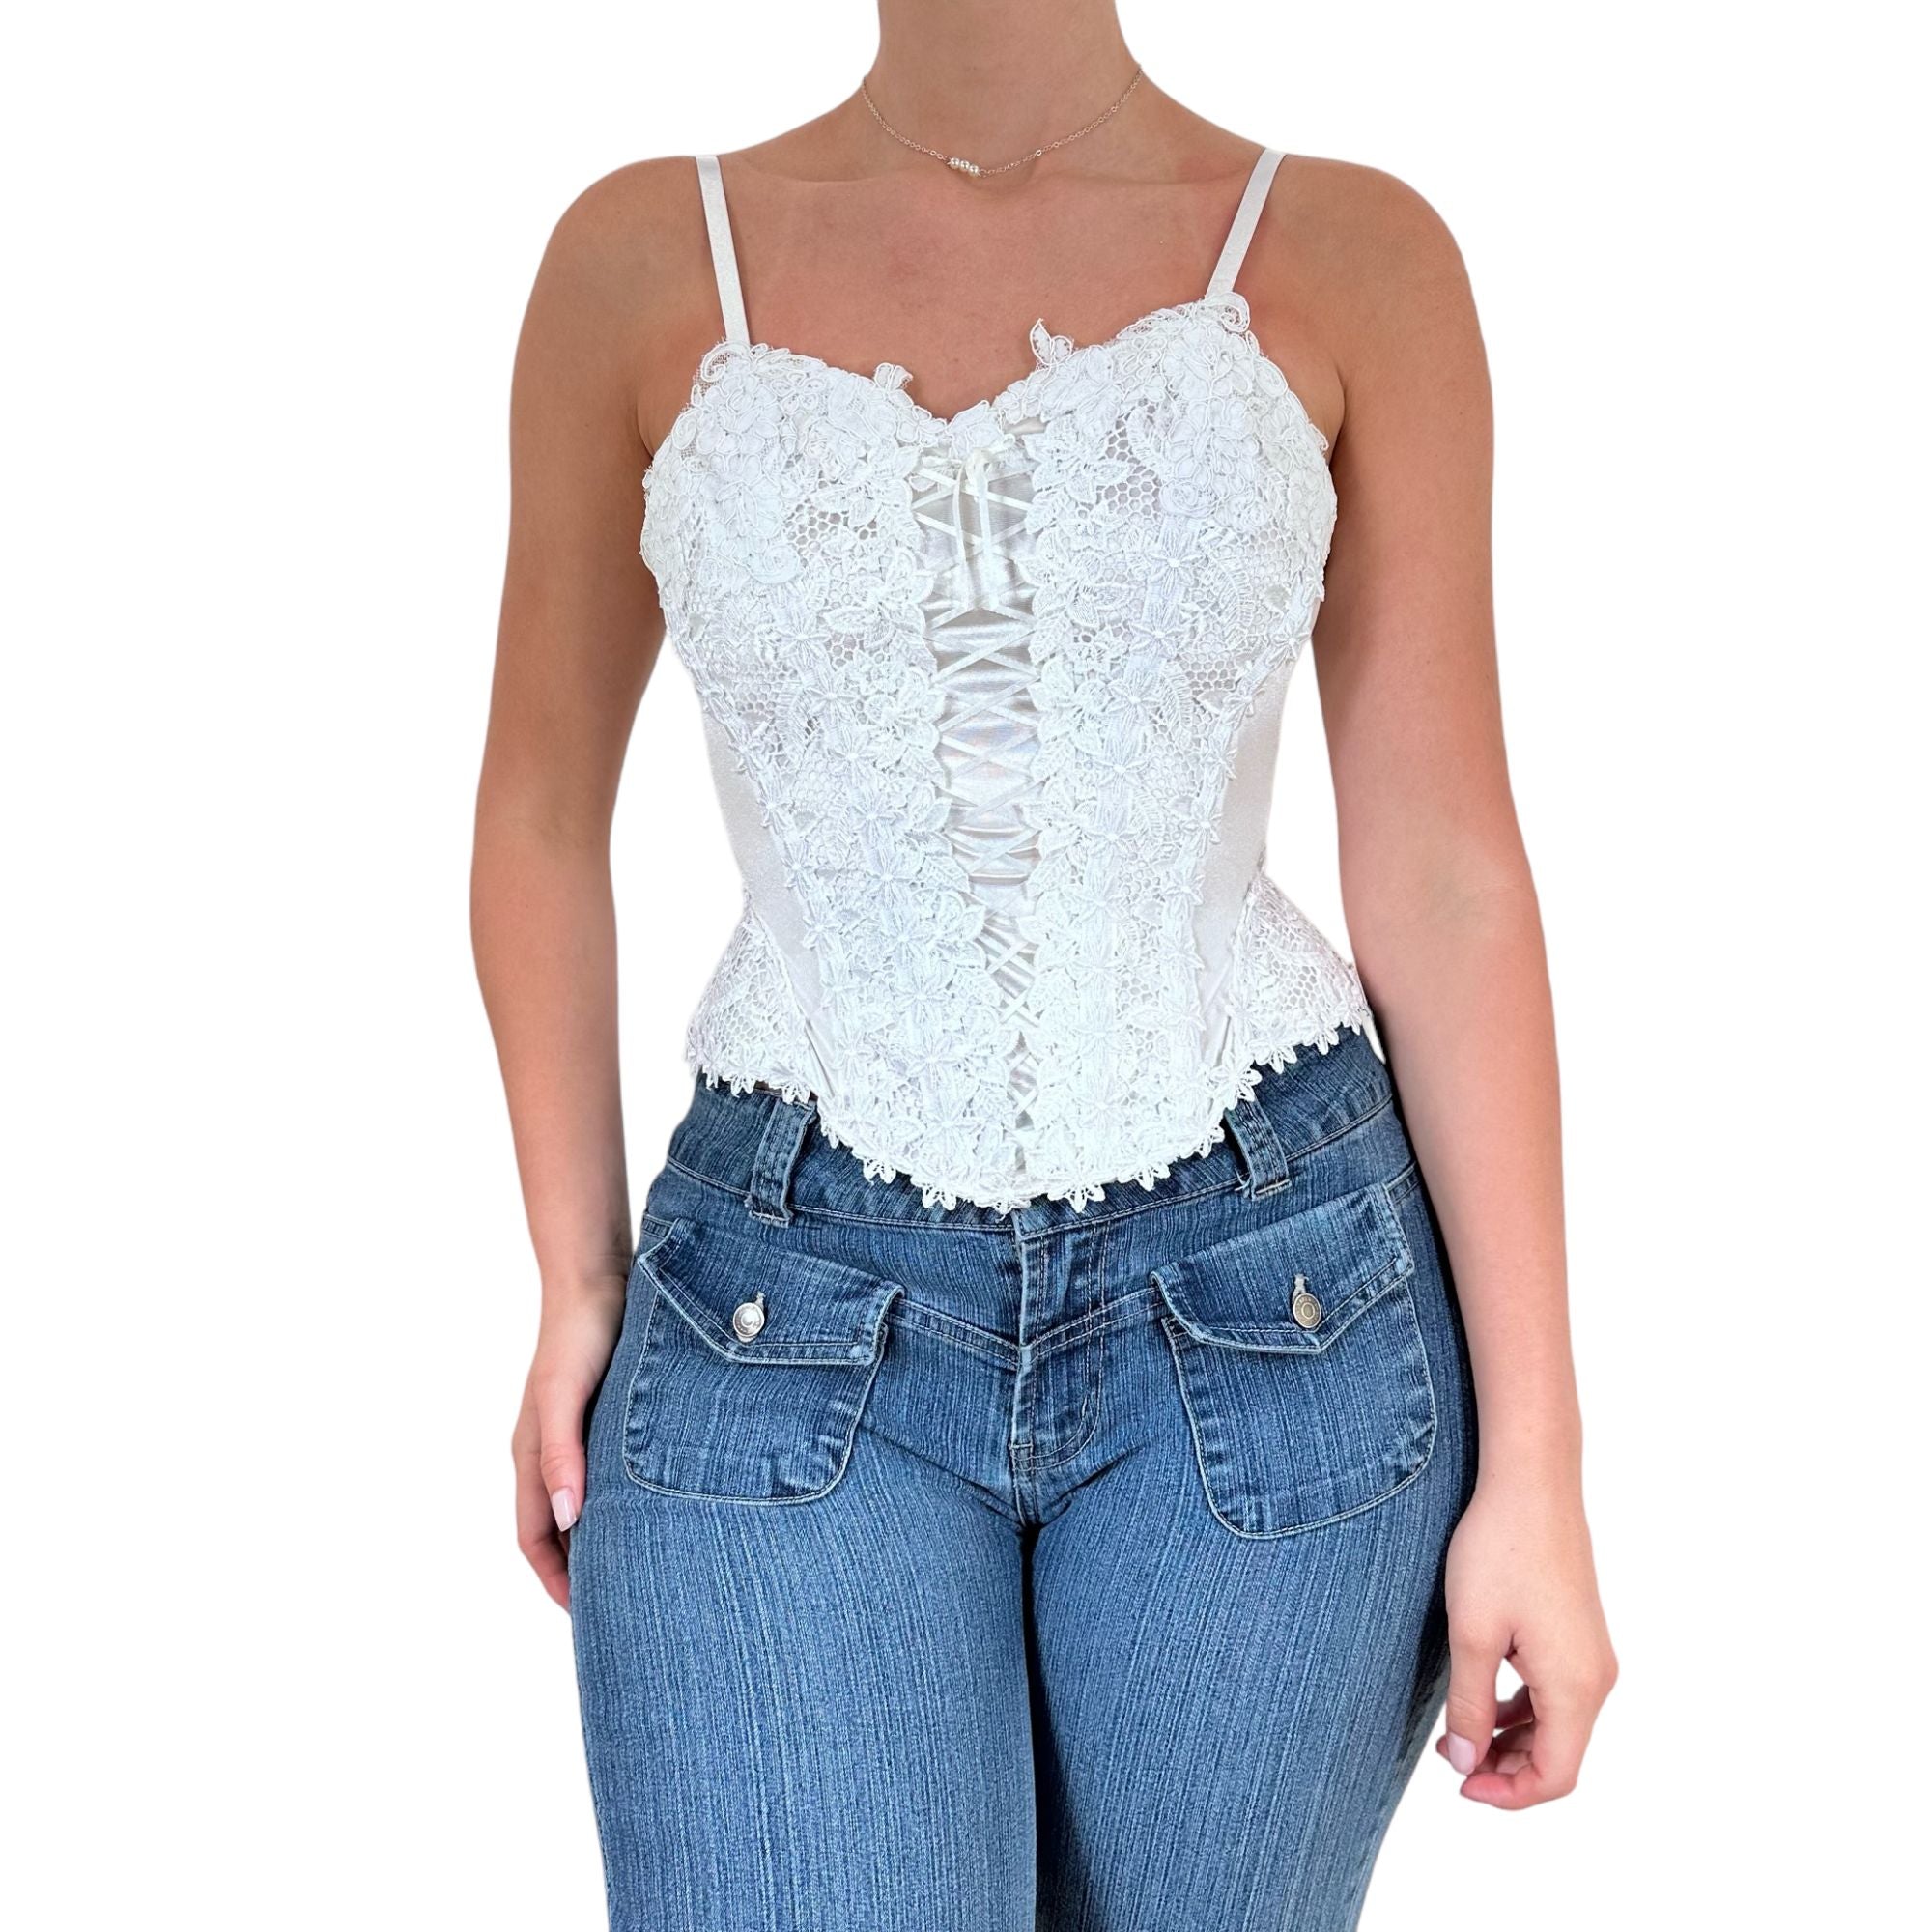 90s Rare Vintage Frederick's of Hollywood White Lace Floral Top [S]